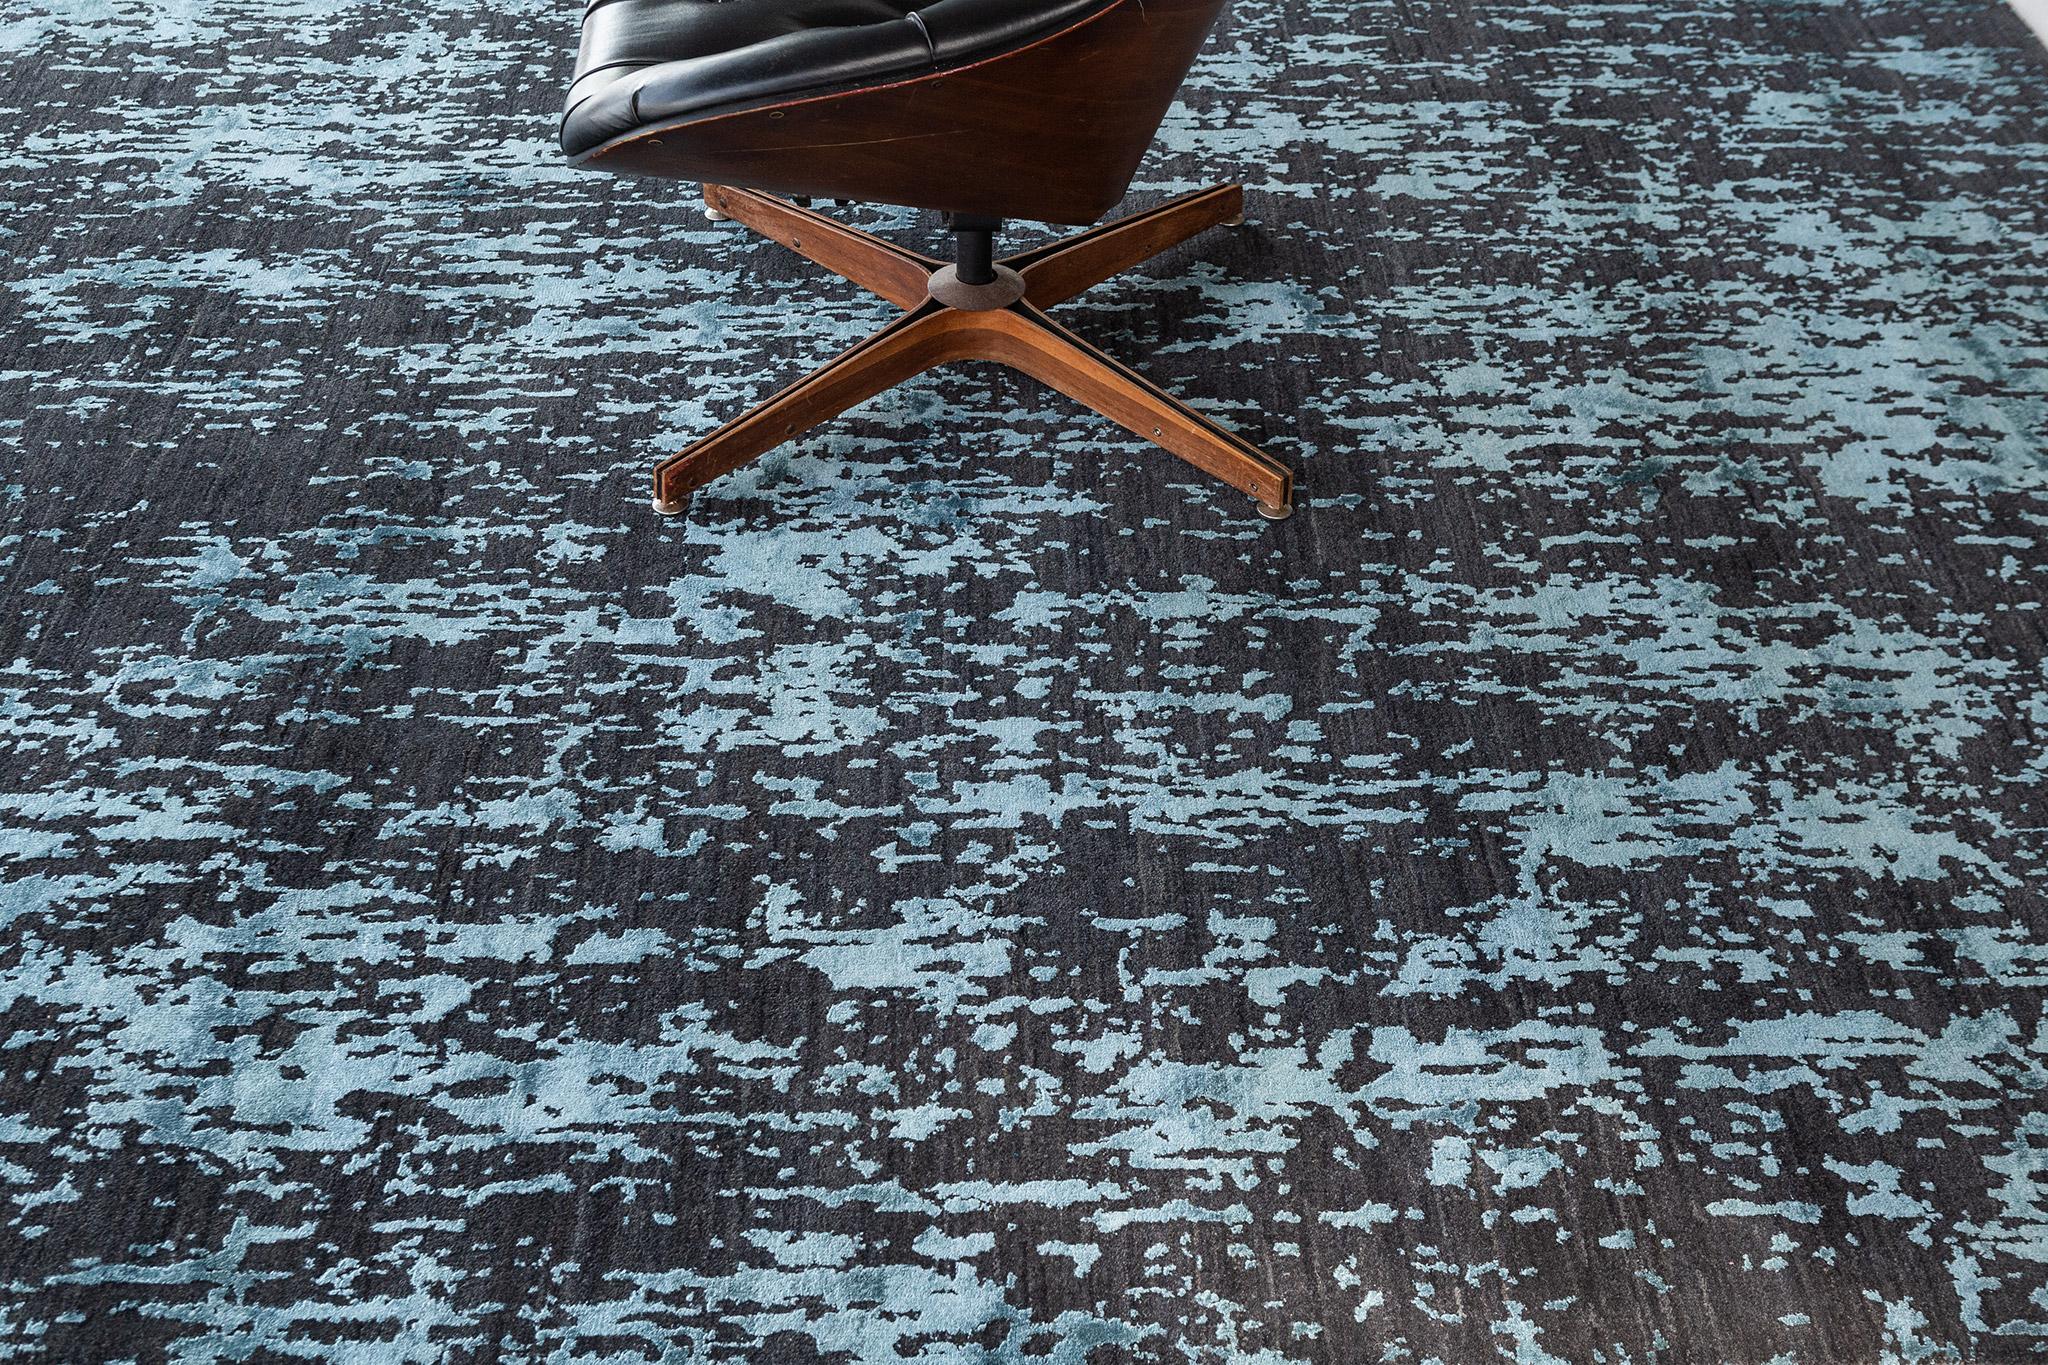 Mezzo is a wool and silk rug in an abstract splash over amazing tones of blacks and mints. A masterpiece that balances the luxurious quality with contemporary and modern spaces.  An eye-catcher that would be loved by your guests.

Rug